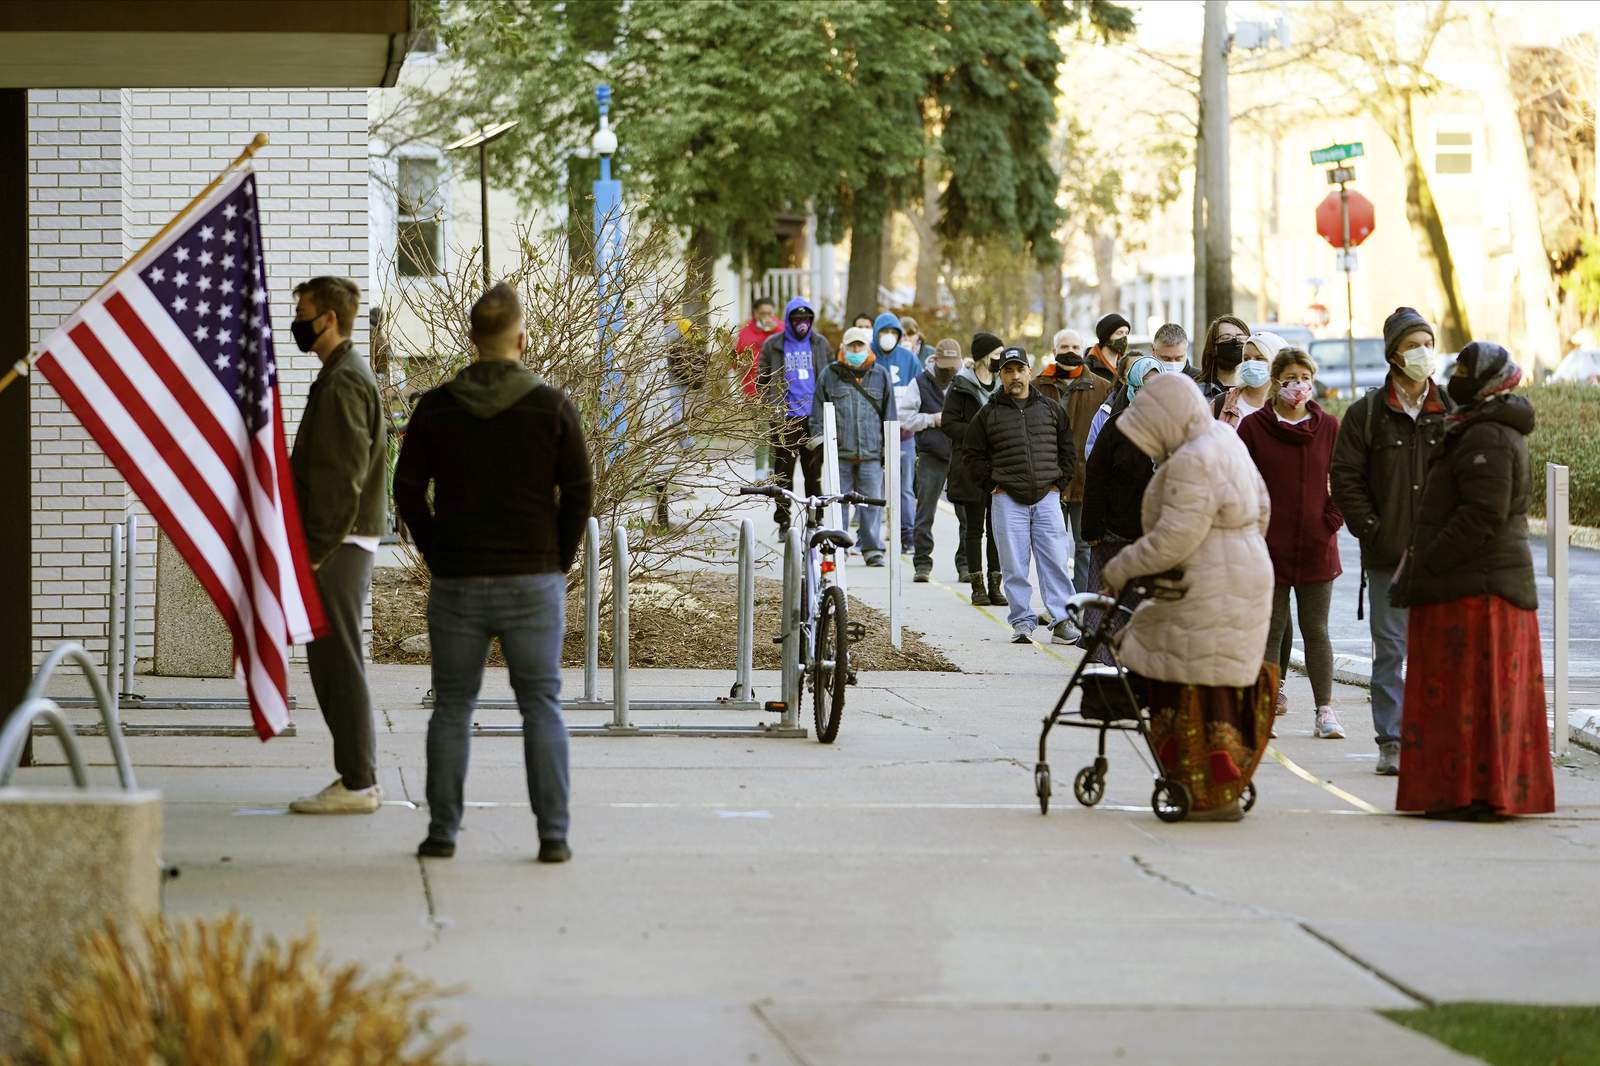 Gallery: Here’s what Election Day looks like across America